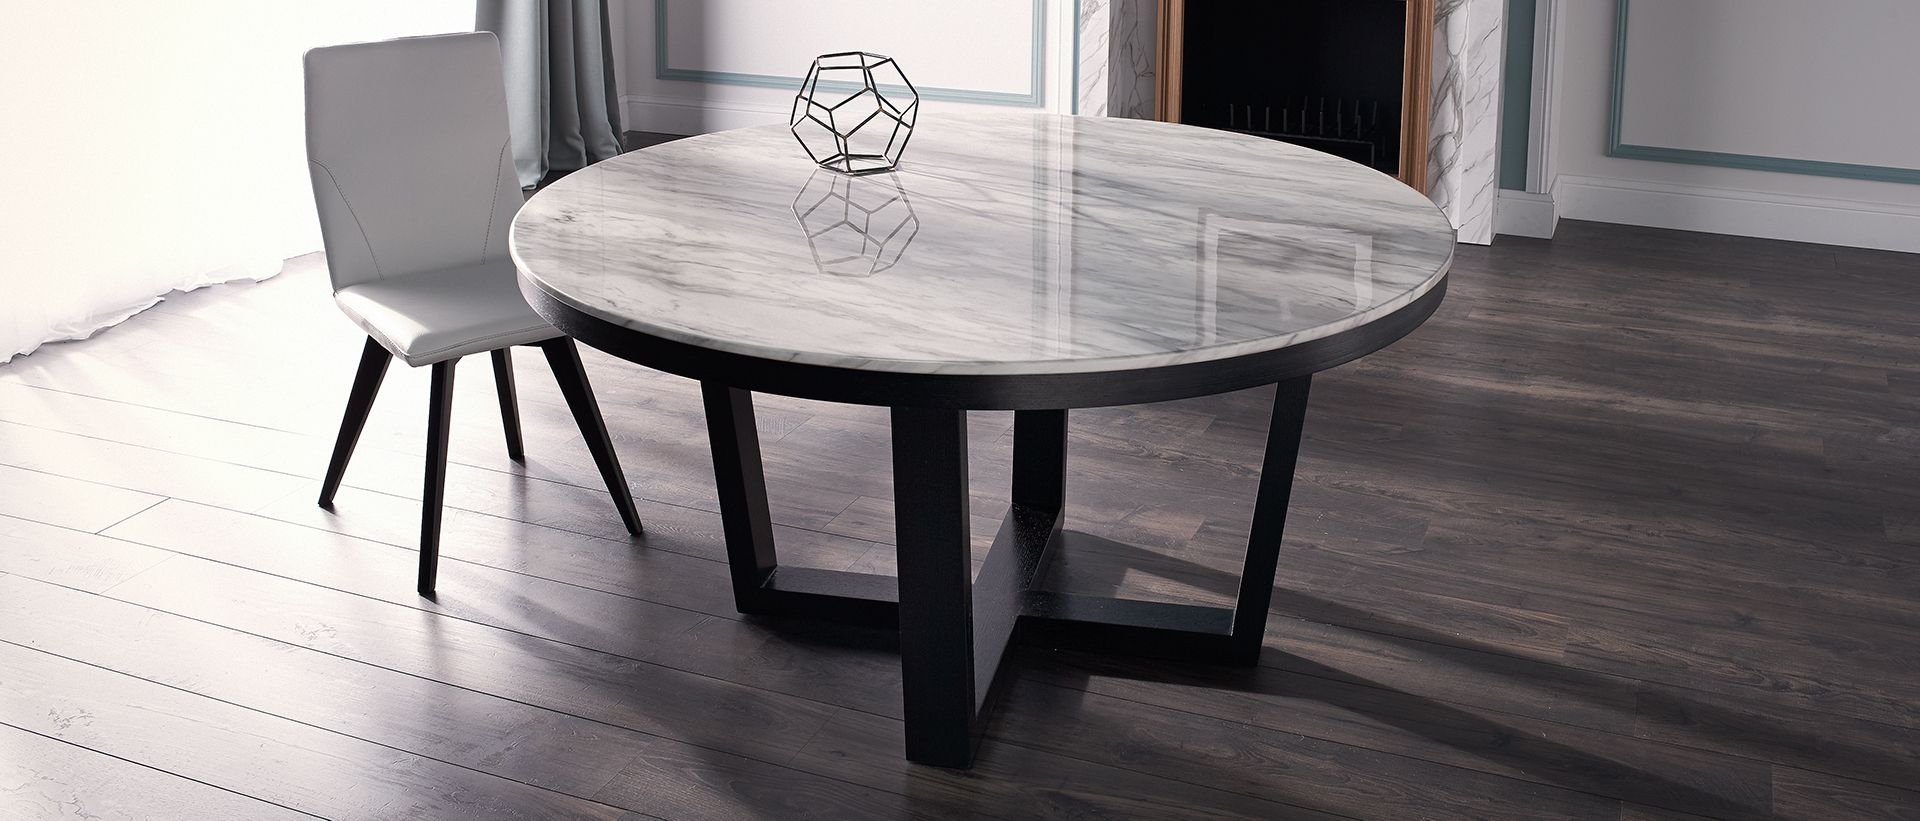 Dining Tables Round Wood Concrete Tables Nick Scali throughout sizing 1920 X 821